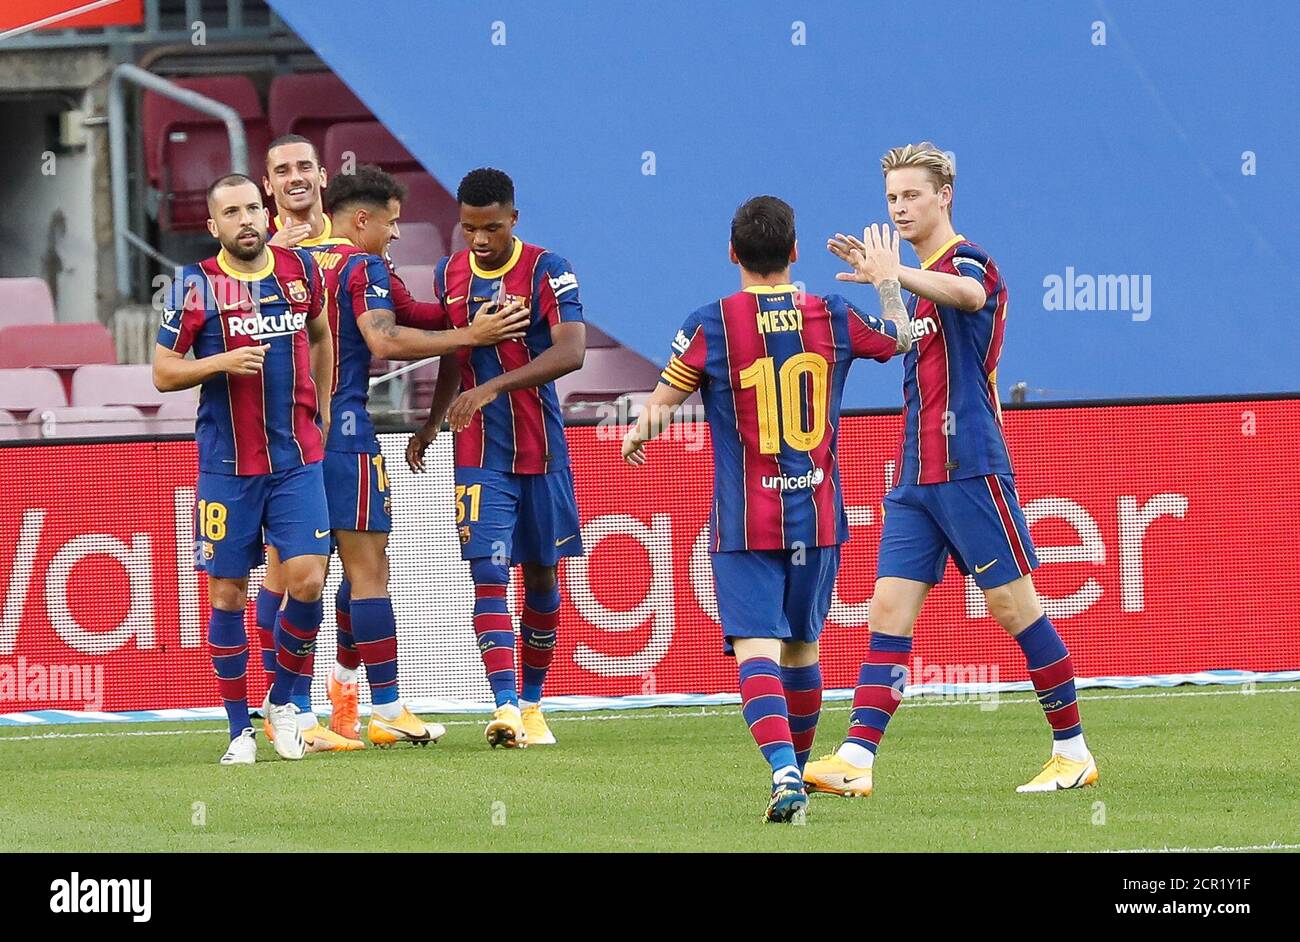 Barcelona, Barcelona, Spain. 19th Sep, 2020. Players of FC Barcelona celebrates a goal during the Gamper Trophy match between FC Barcelona and Elche at Camp Nou on September 19, 2020 in Barcelona, Spain. Credit: David Ramirez/DAX/ZUMA Wire/Alamy Live News Stock Photo